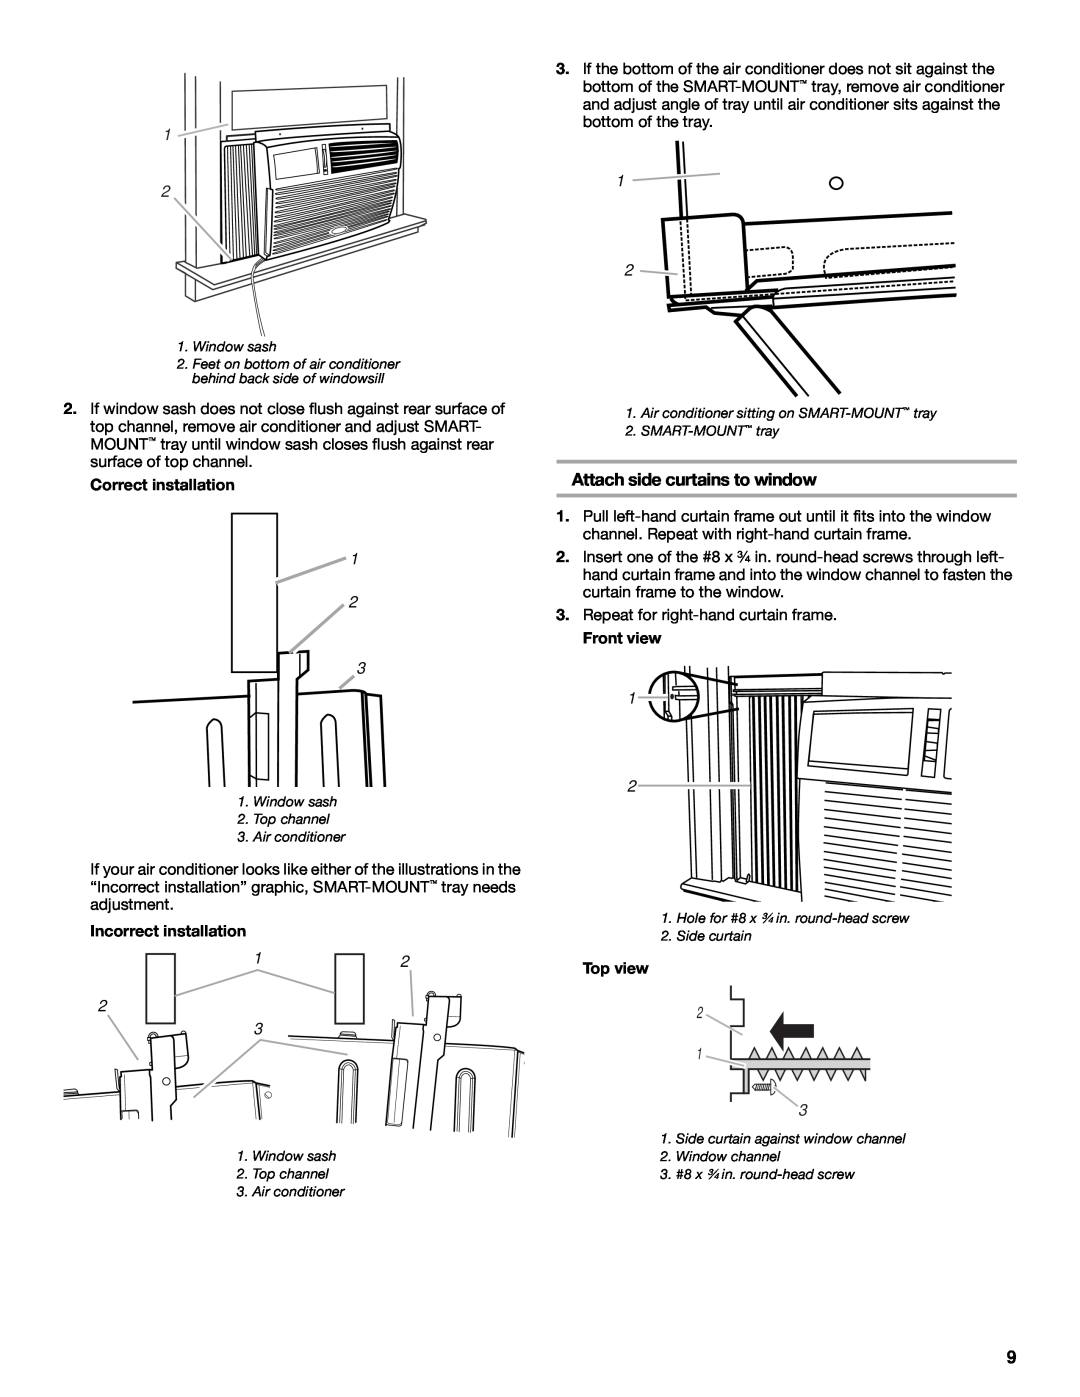 Whirlpool 1187361 manual Attach side curtains to window, Correct installation, 1 2 3, Incorrect installation, Front view 